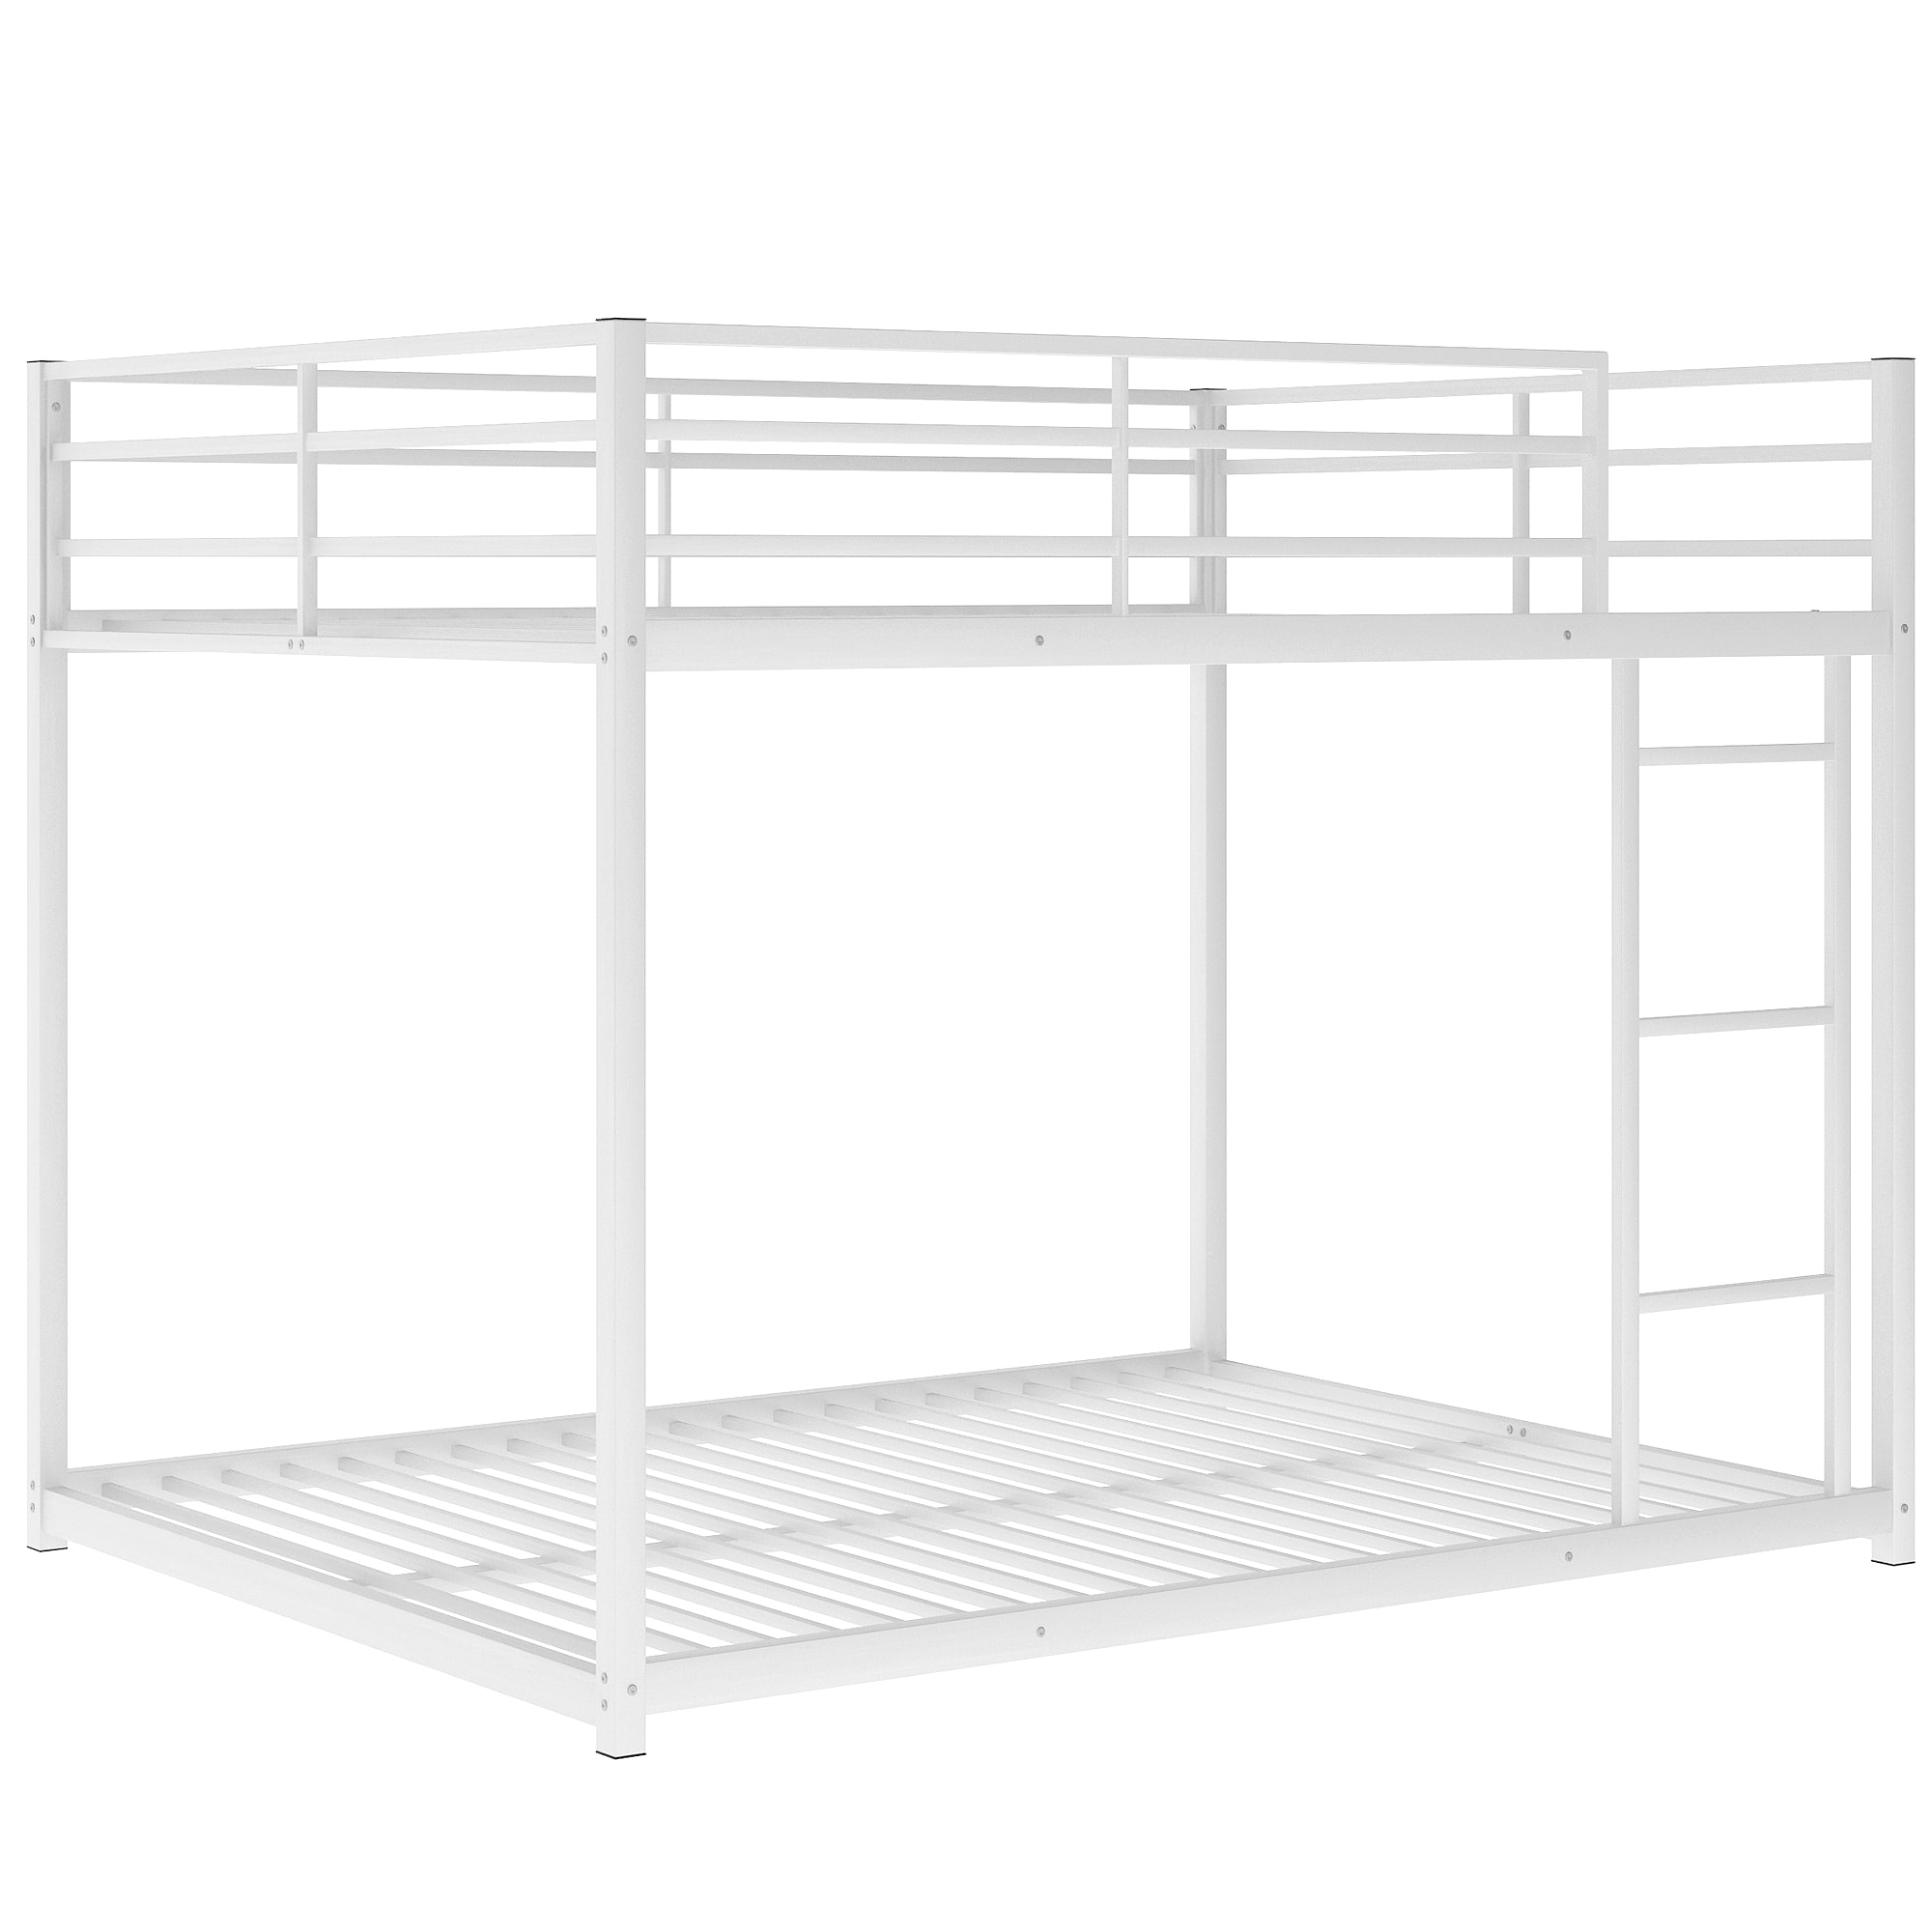 Sumyeg Full Over Full Metal Bunk Bed, Low Bunk Bed with Ladder, White ...